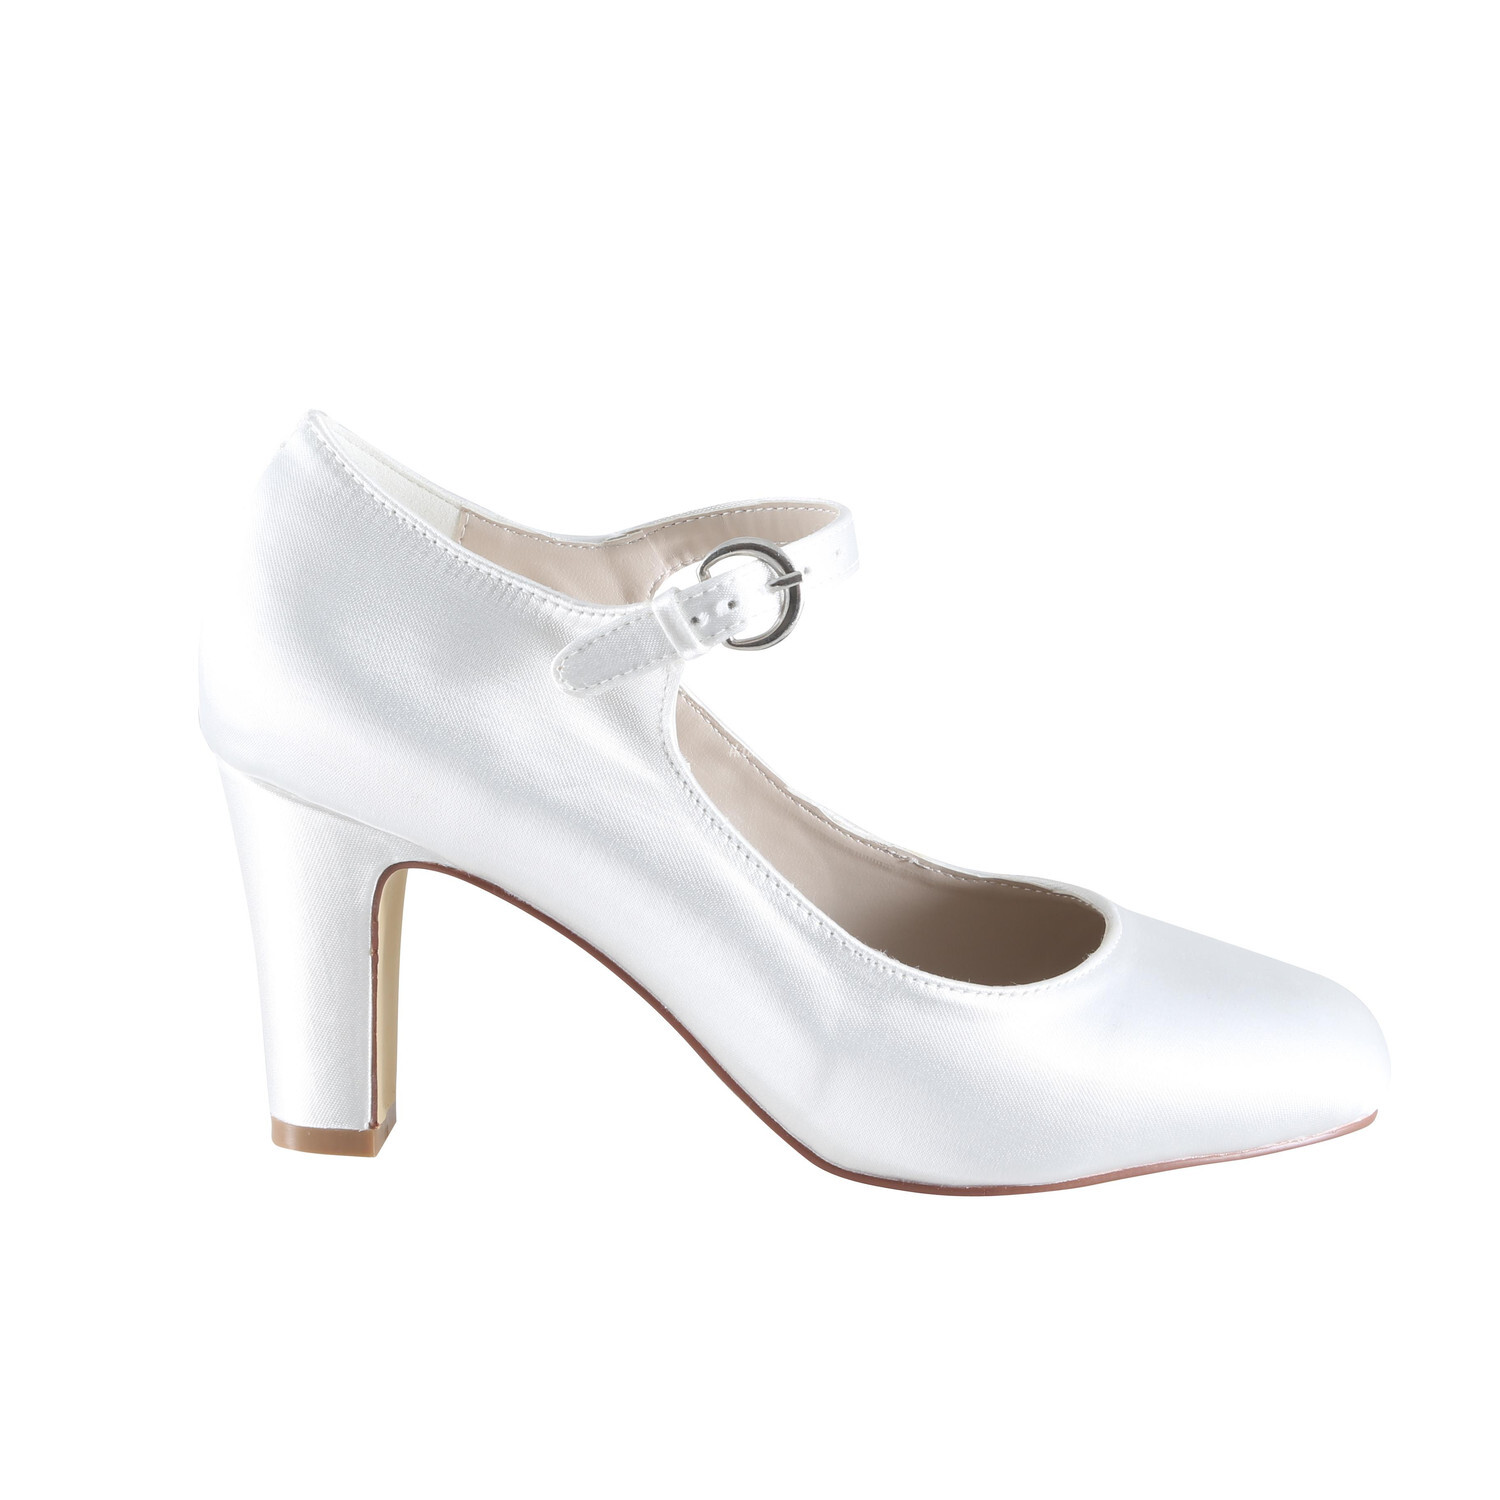 Milly Wedding Shoes from The Perfect Bridal Company - hitched.co.uk